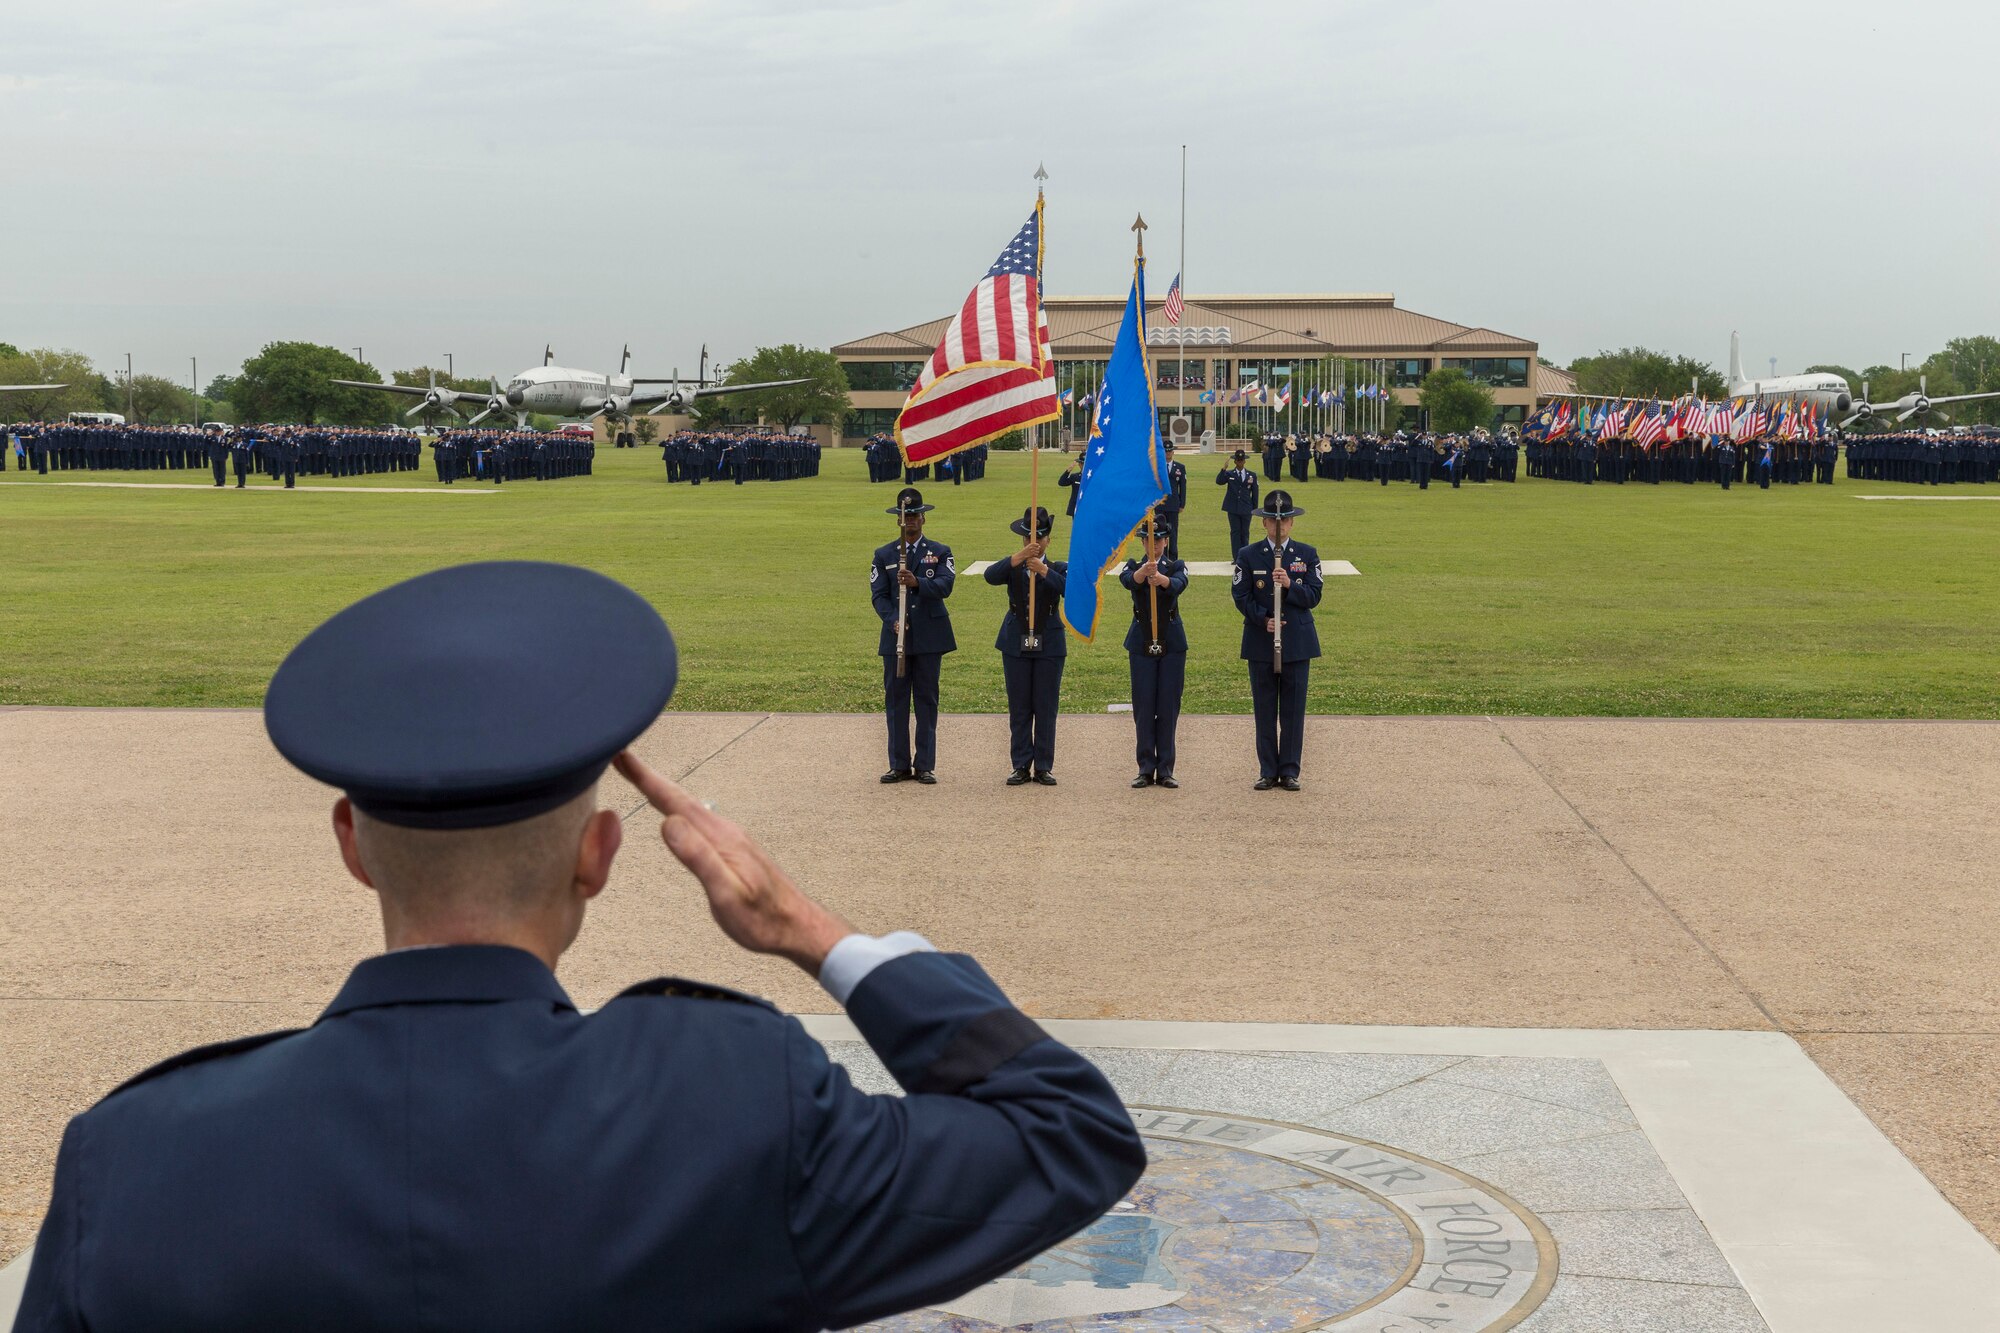 Lt. Gen. Steven L. Kwast (Left), Commander of the Air Education and Training Command salutes at Joint Base San Antonio-Lackland, Texas during a basic military training graduation ceremony April 20, 2018. The ceremony also acknowledged the beginning of “Fiesta San Antonio,” the city’s annual festival held to honor the memory of the battles of the Alamo and San Jacinto. (U.S. Air Force photo by Ismael Ortega / Released)